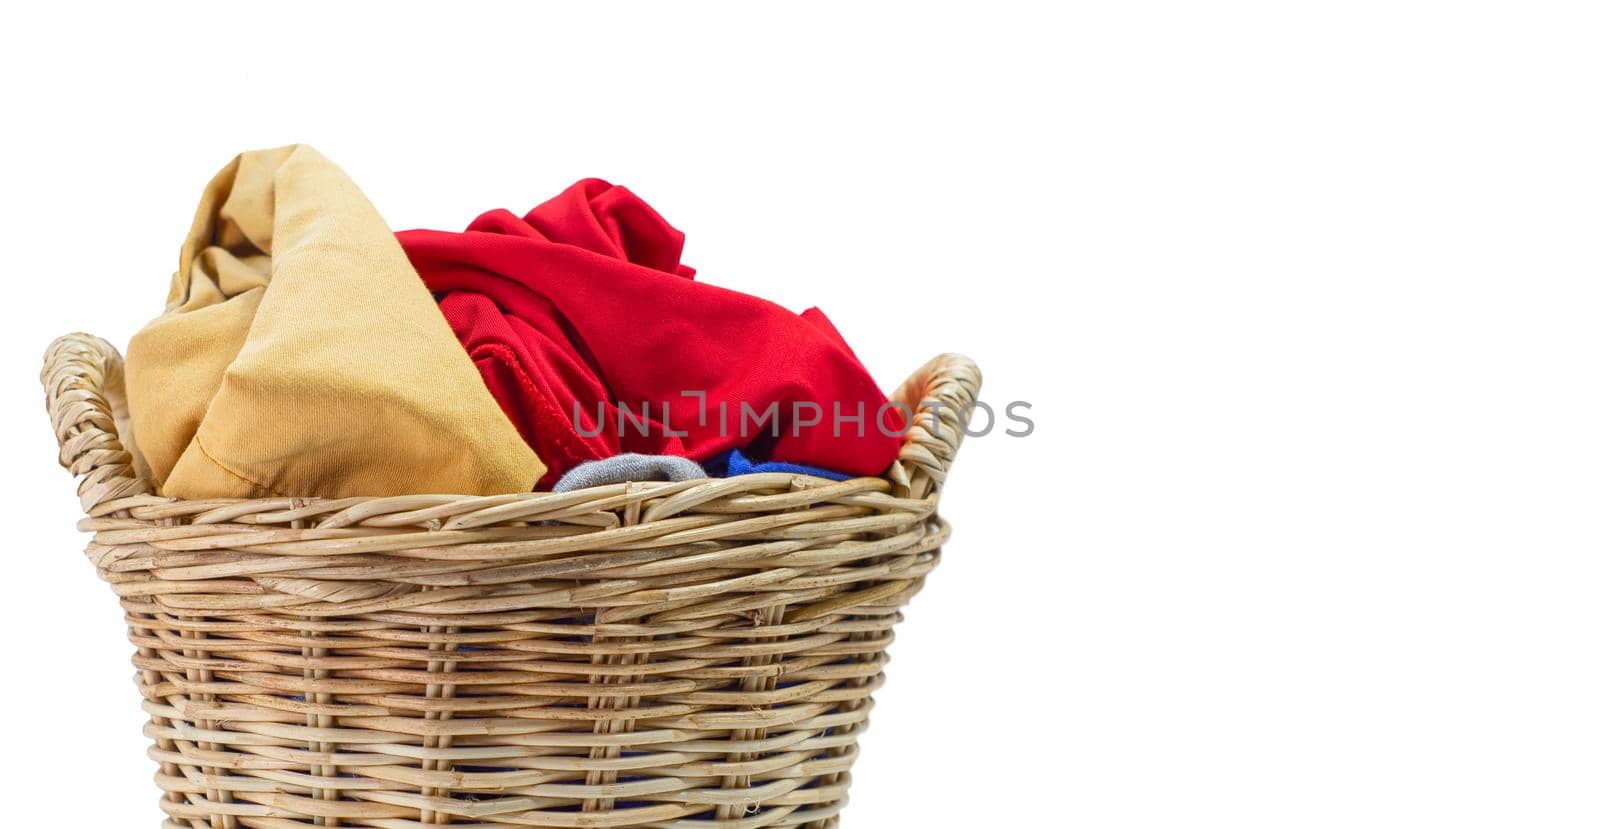 Clothes in a laundry wicker basket isolated on white background.